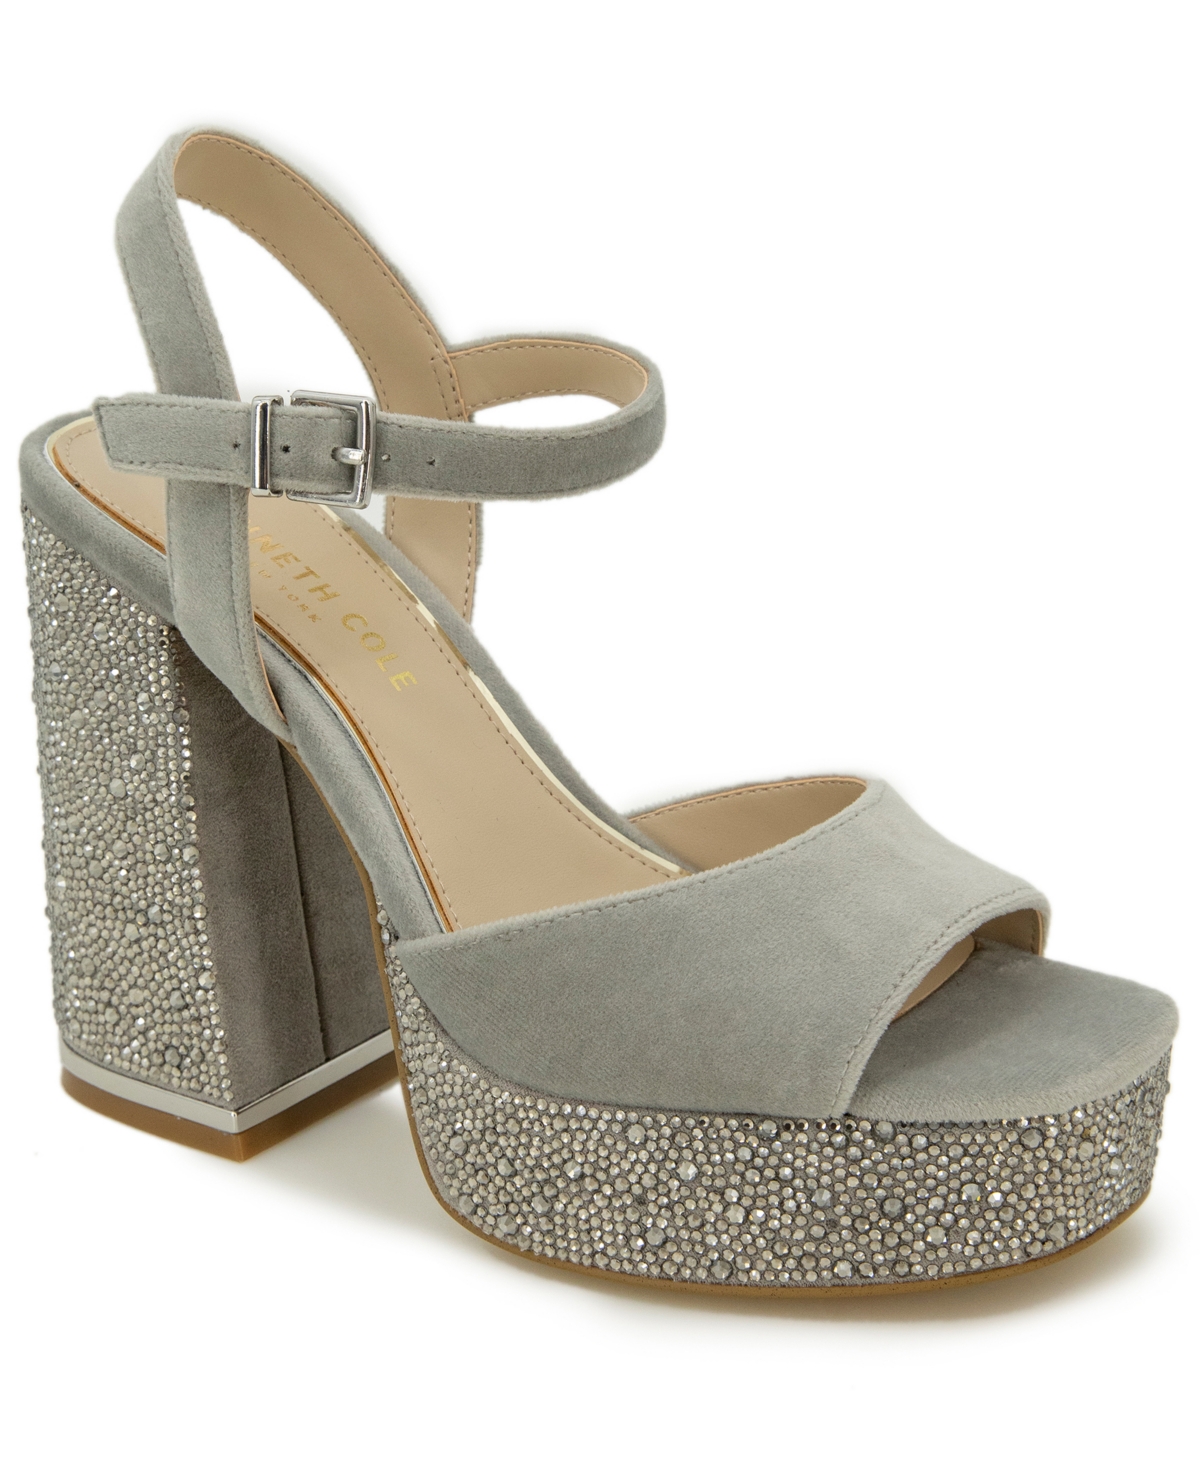 Kenneth Cole New York Women's Dolly Crystal Platform Sandals Women's Shoes